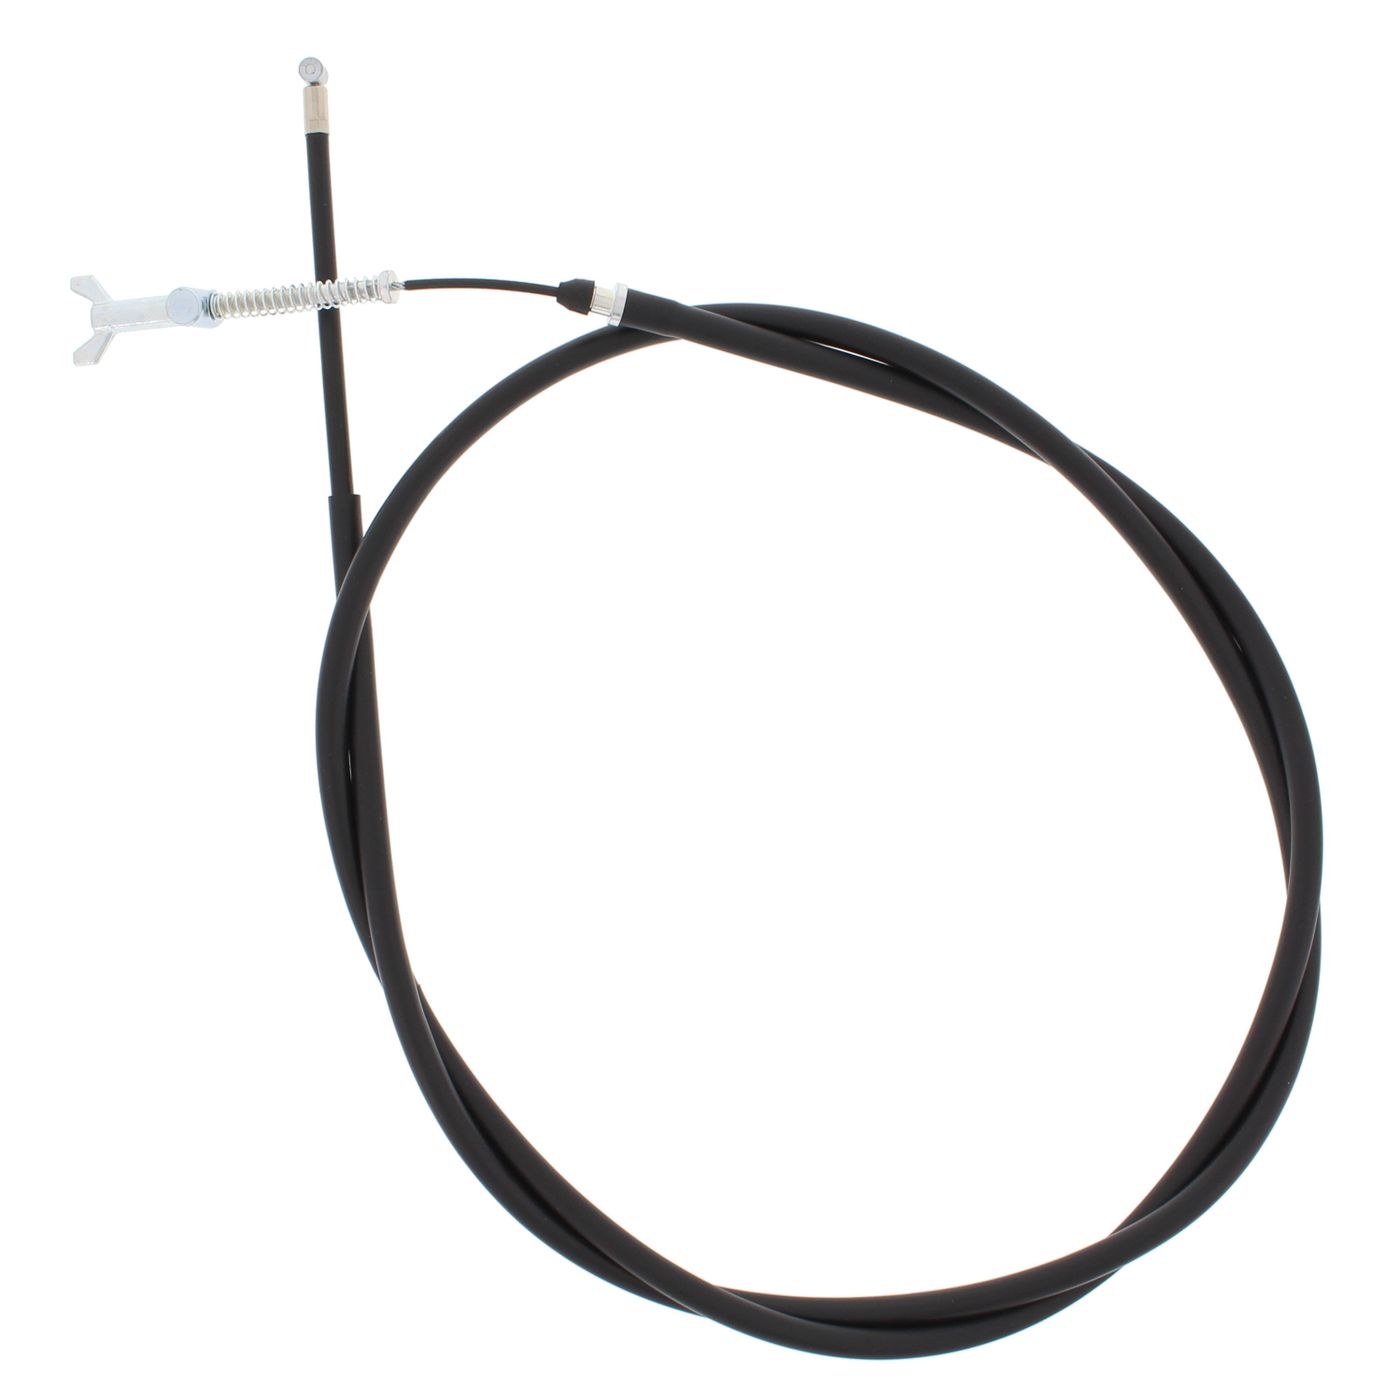 Wrp Brake Cables - WRP454033 image